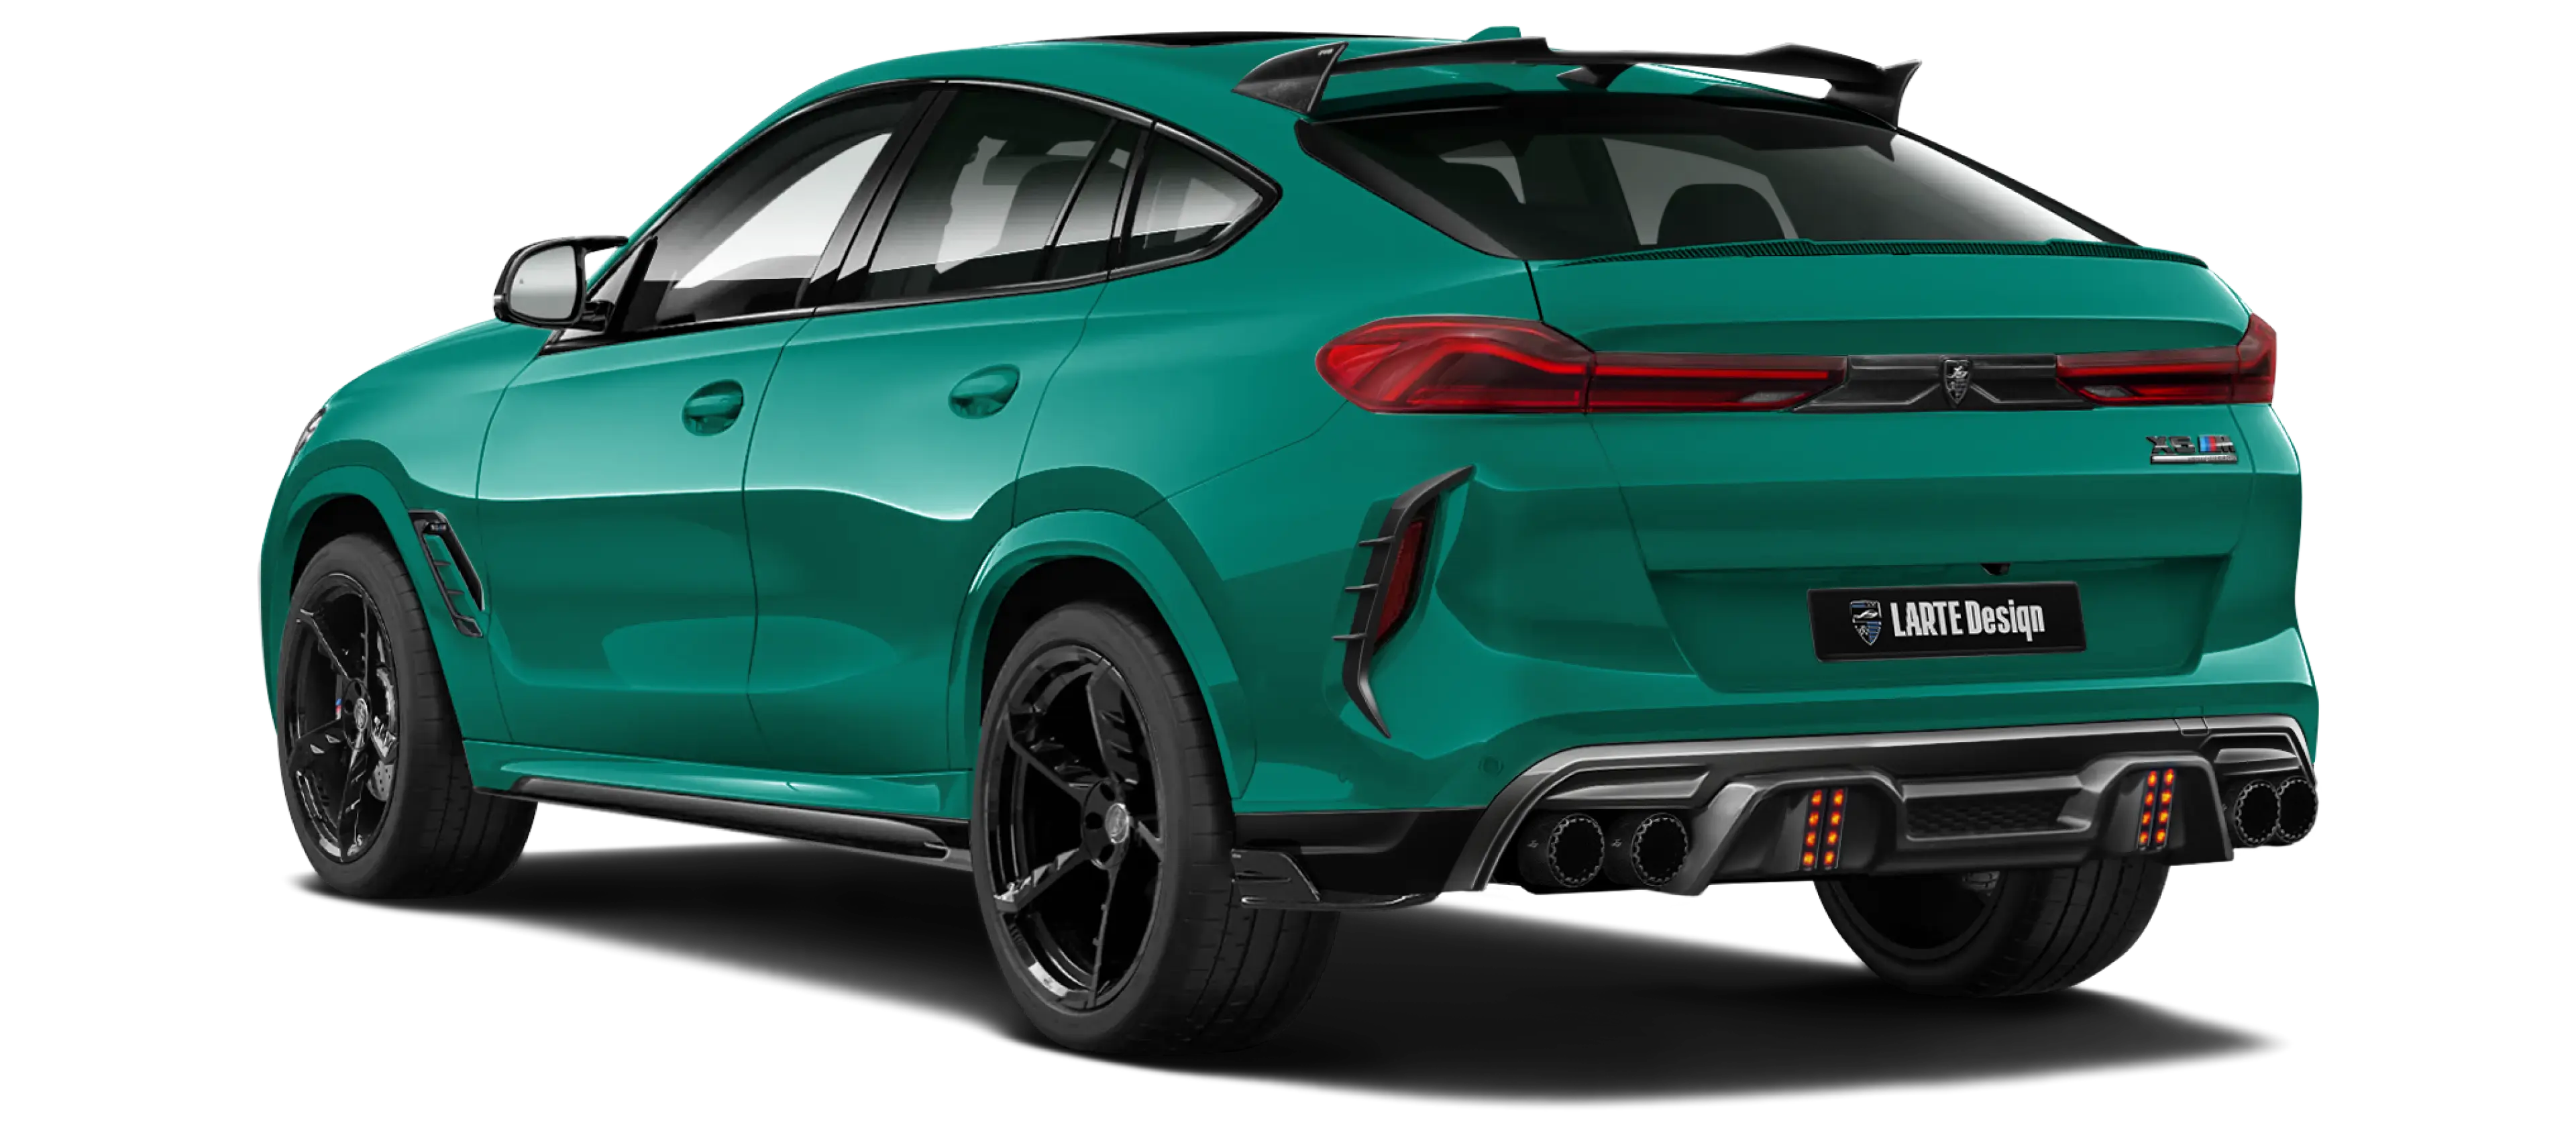 BMW X6M F96 LCI 2023 with painted body kit: rear view shown in Isle Of Man